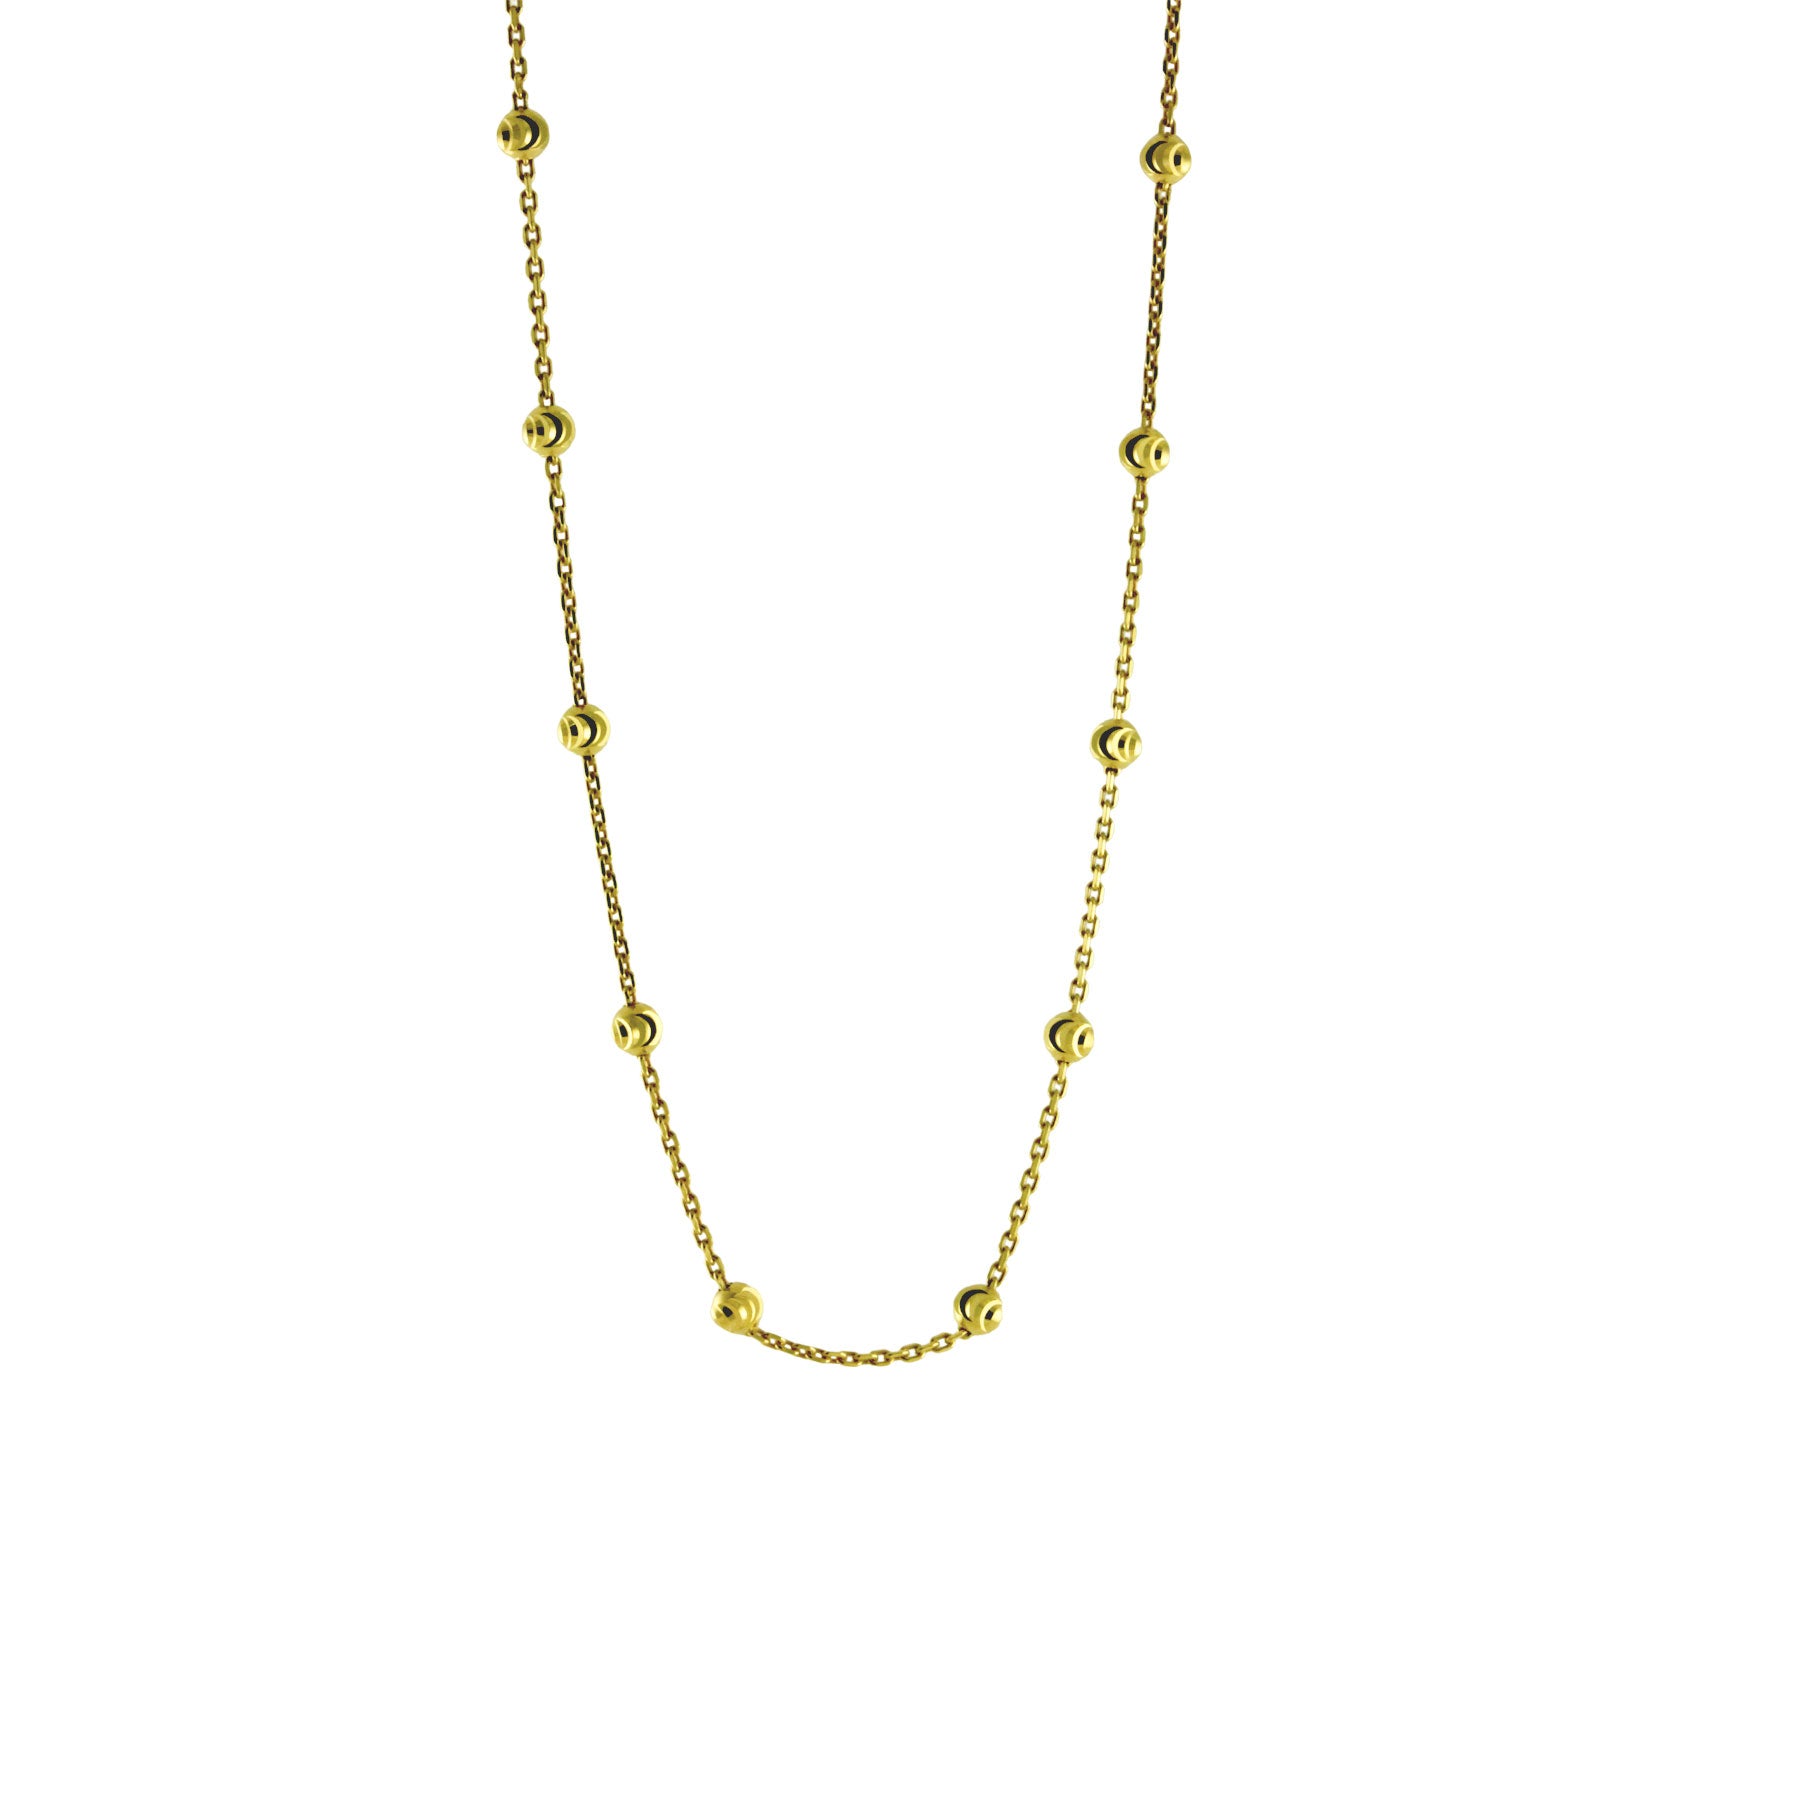 "Moon" Gold-Dipped Beaded Chain Necklace